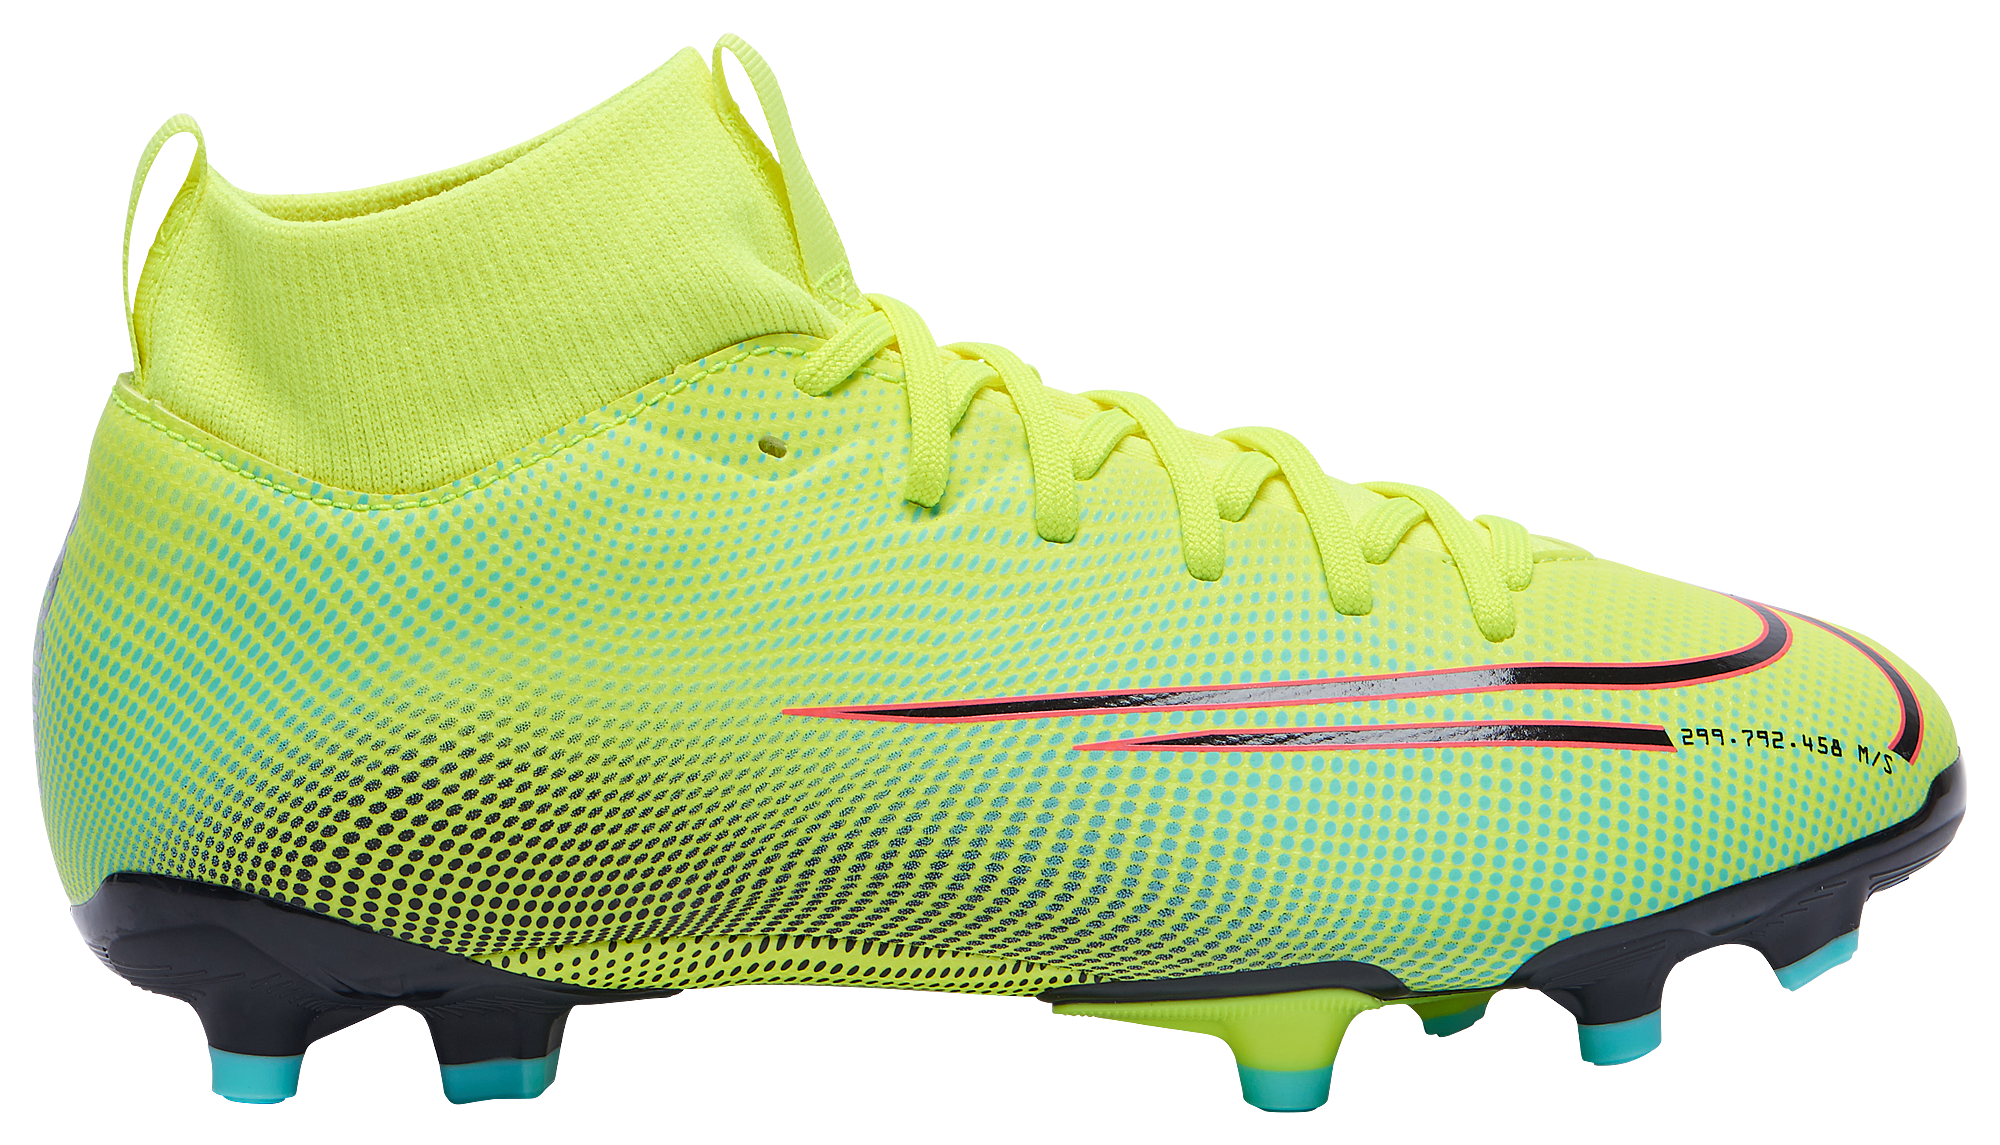 Nike Mercurial Superfly 7 Academy SG PRO New Lights.